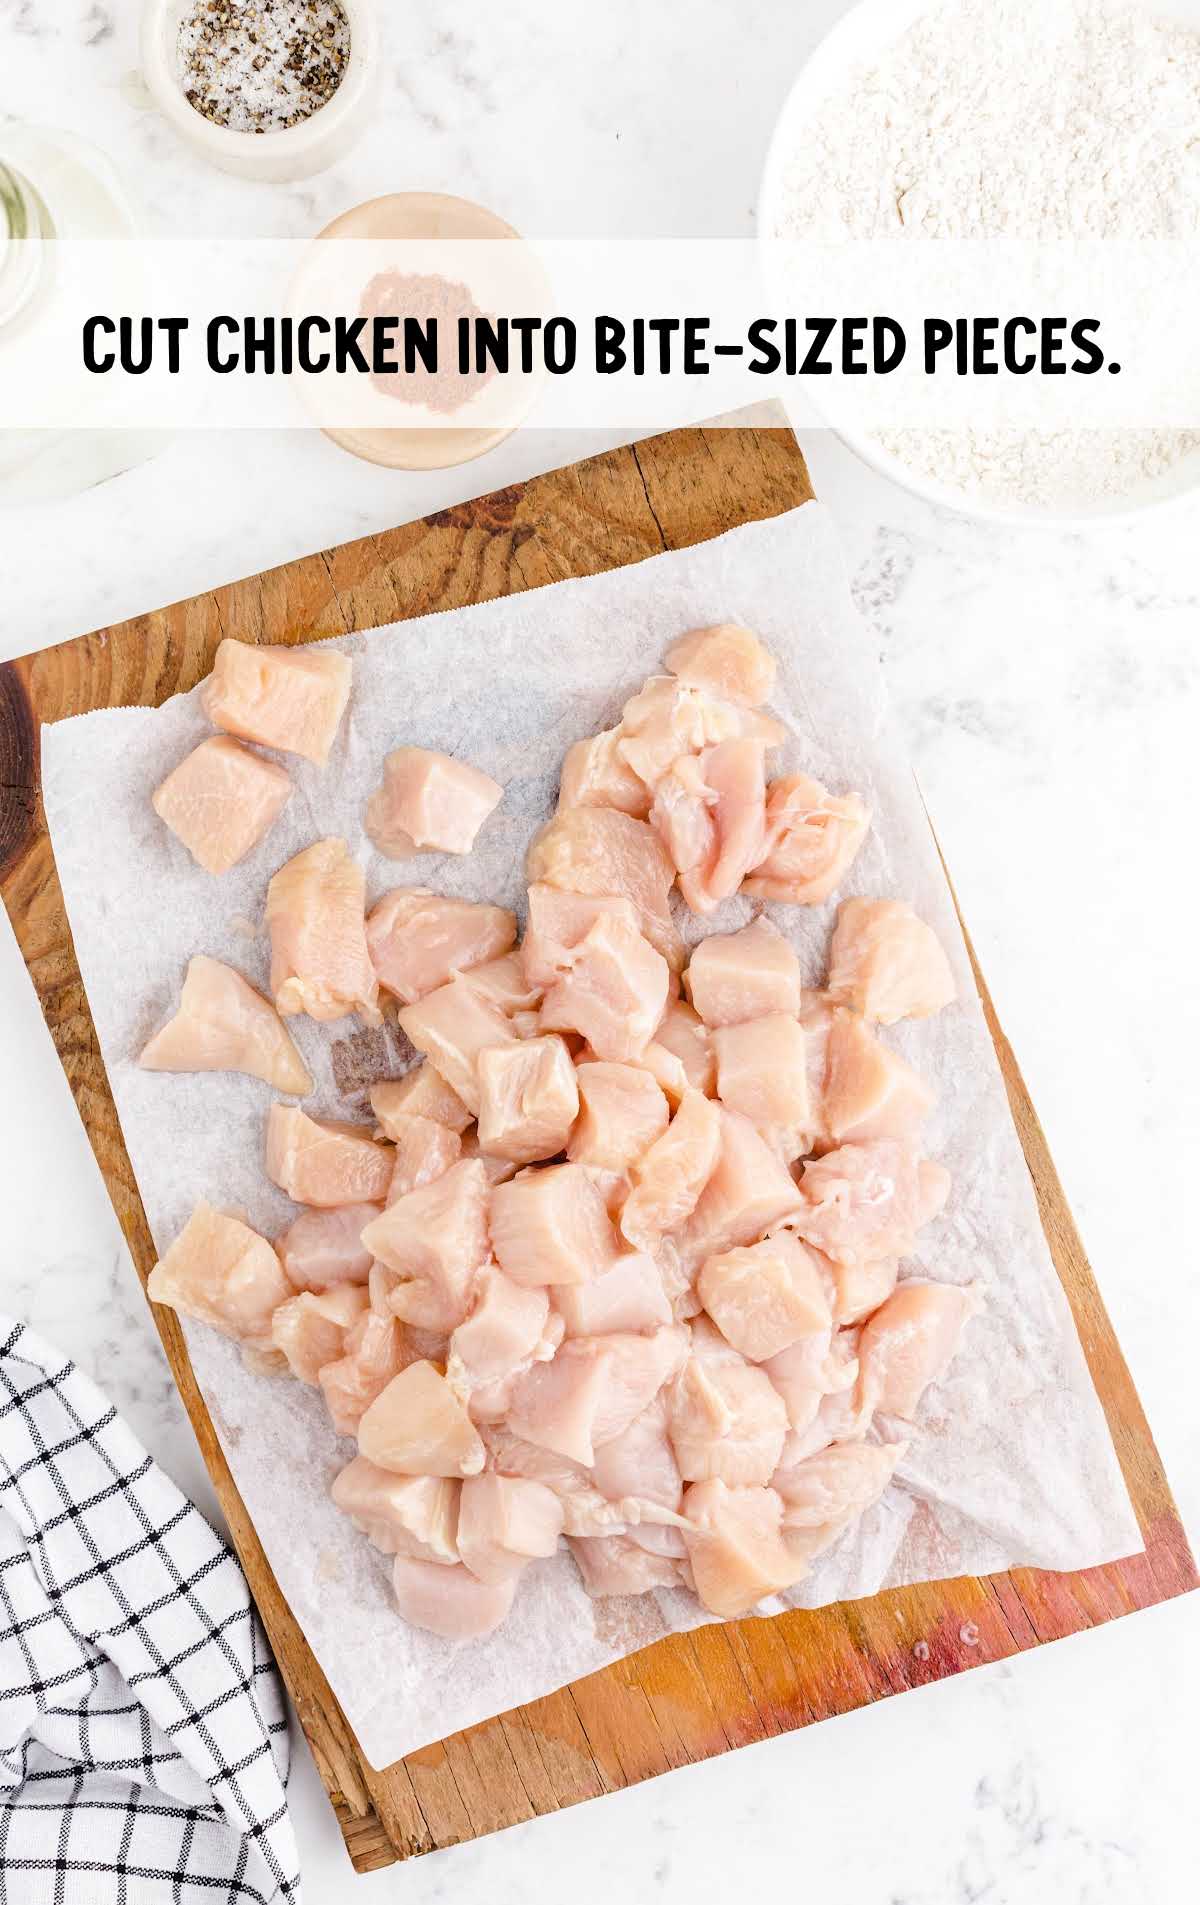 chicken cut into bite size pieces on a wooden board